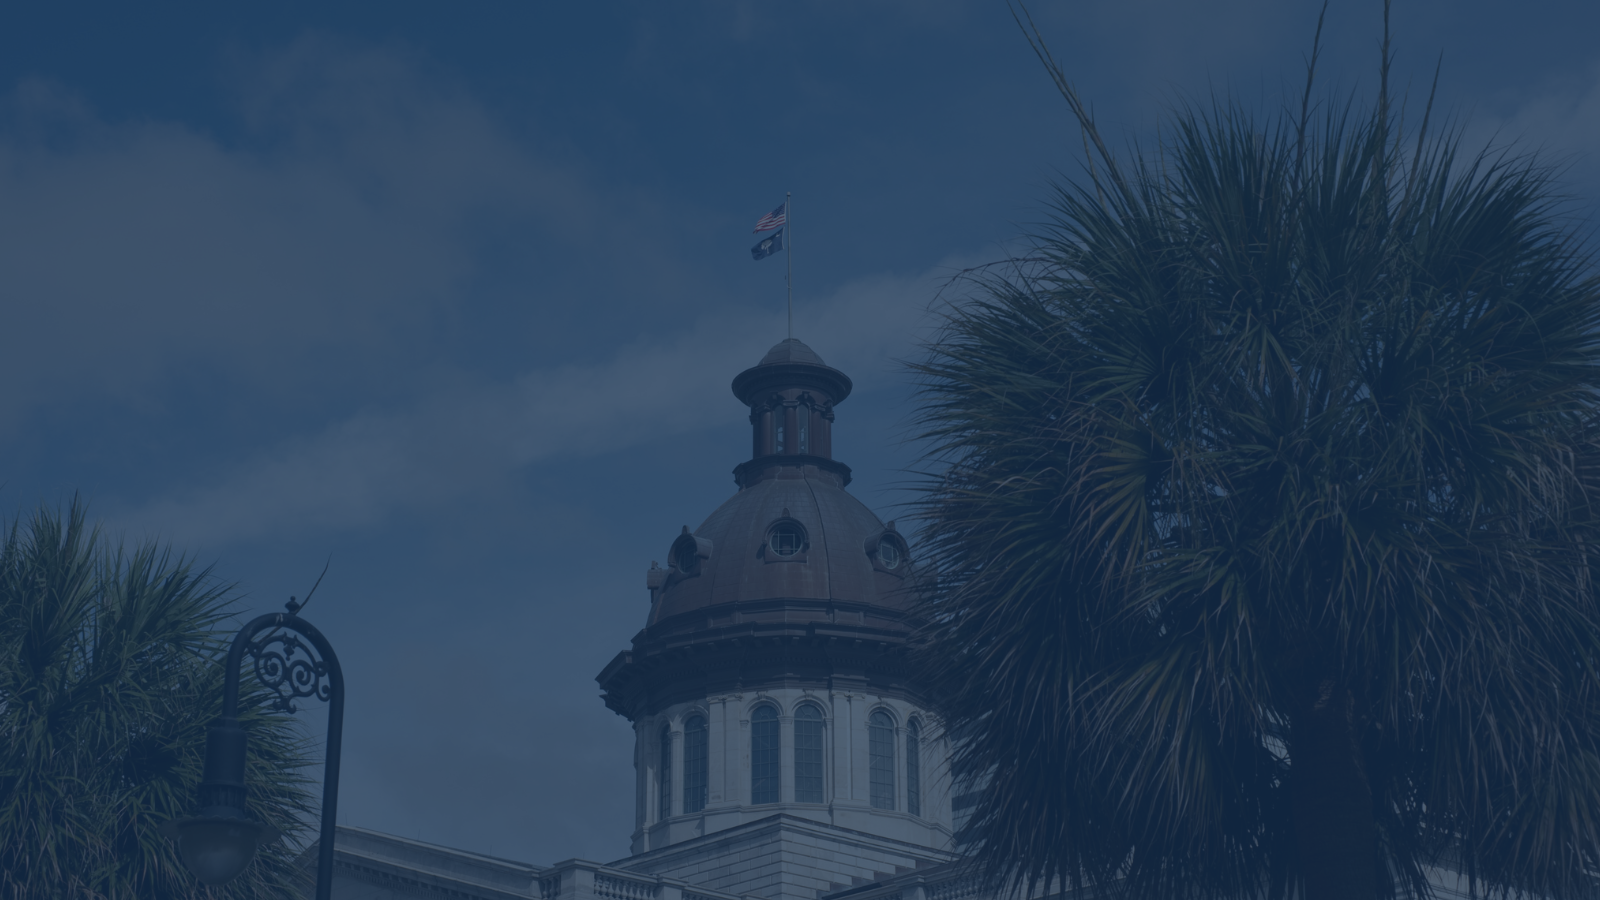 We Finish the Legislative Session, but Our Work is not Done